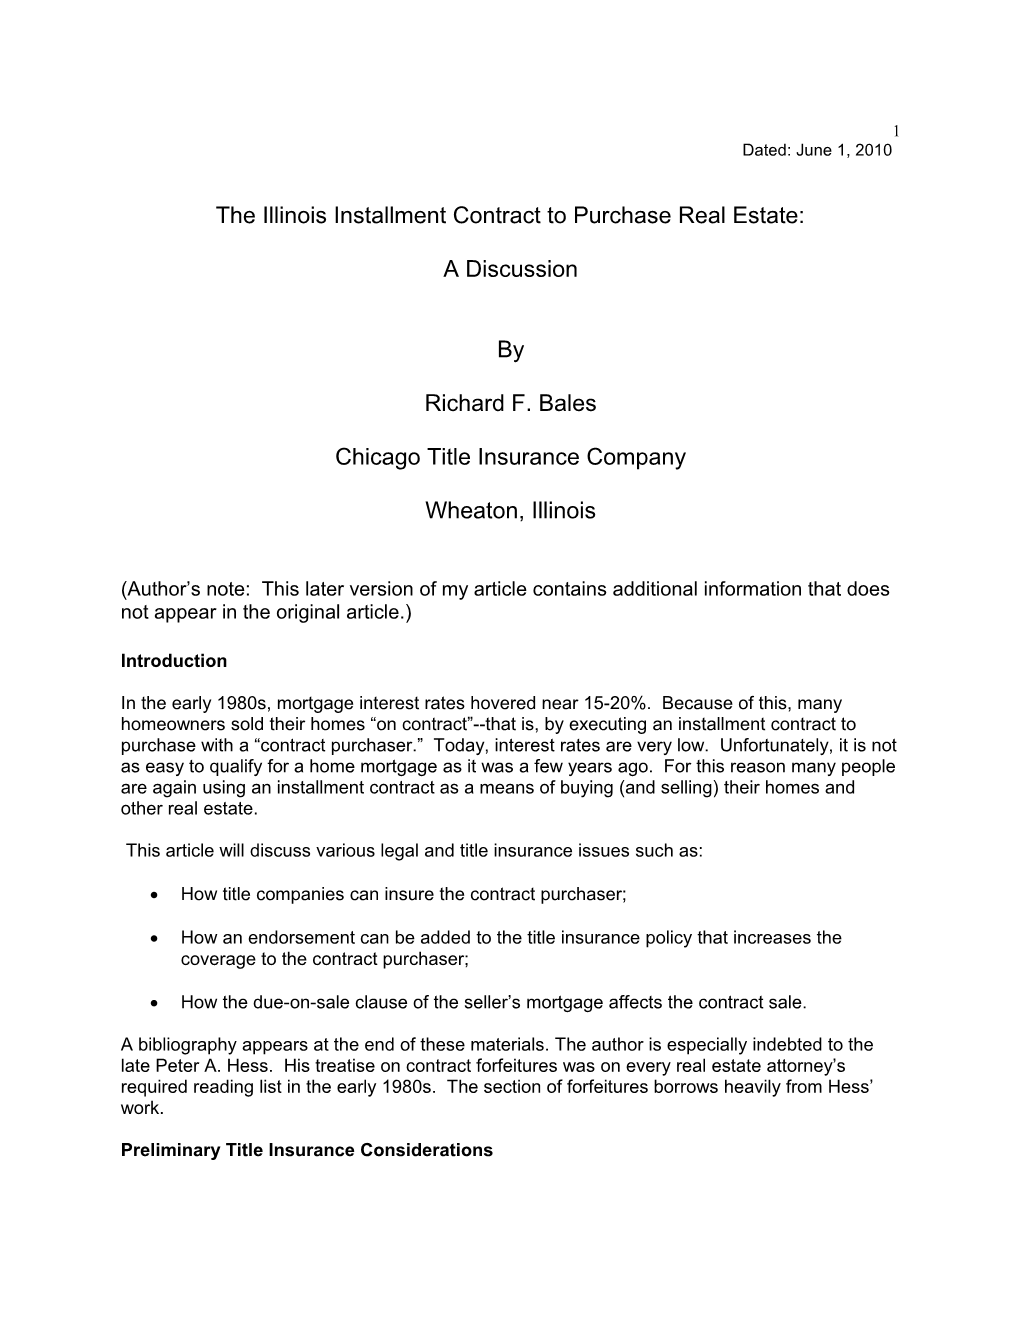 The Illinois Installment Contract to Purchase Real Estate